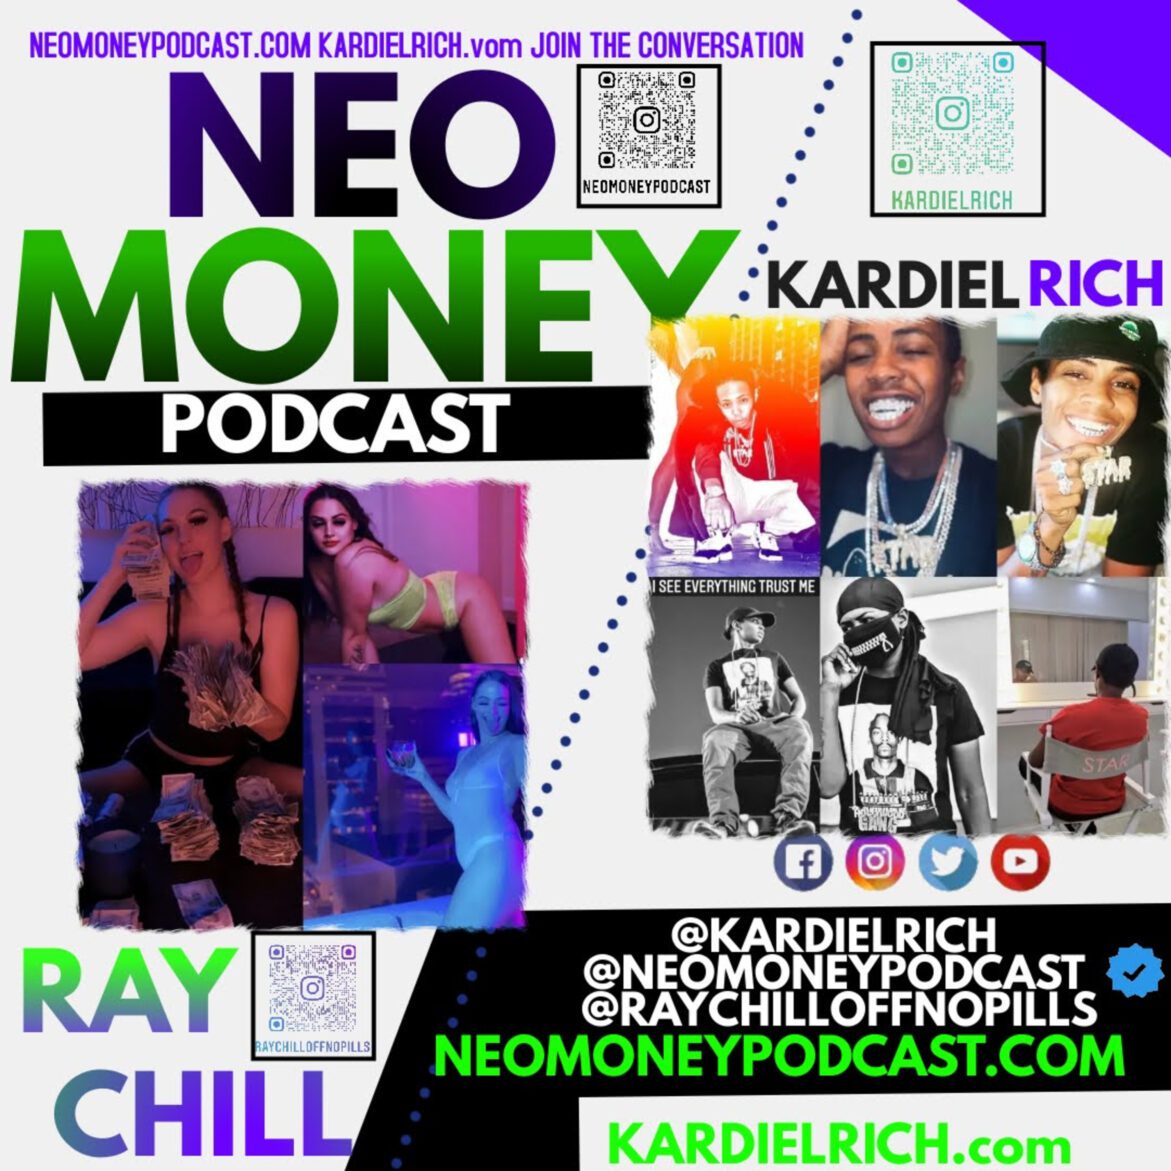 Black Podcasting - STORY TIME WITH KARDIEL RICH & RAY CHILL OFF NO PILLS ♓️😂♎️ CHARLIT